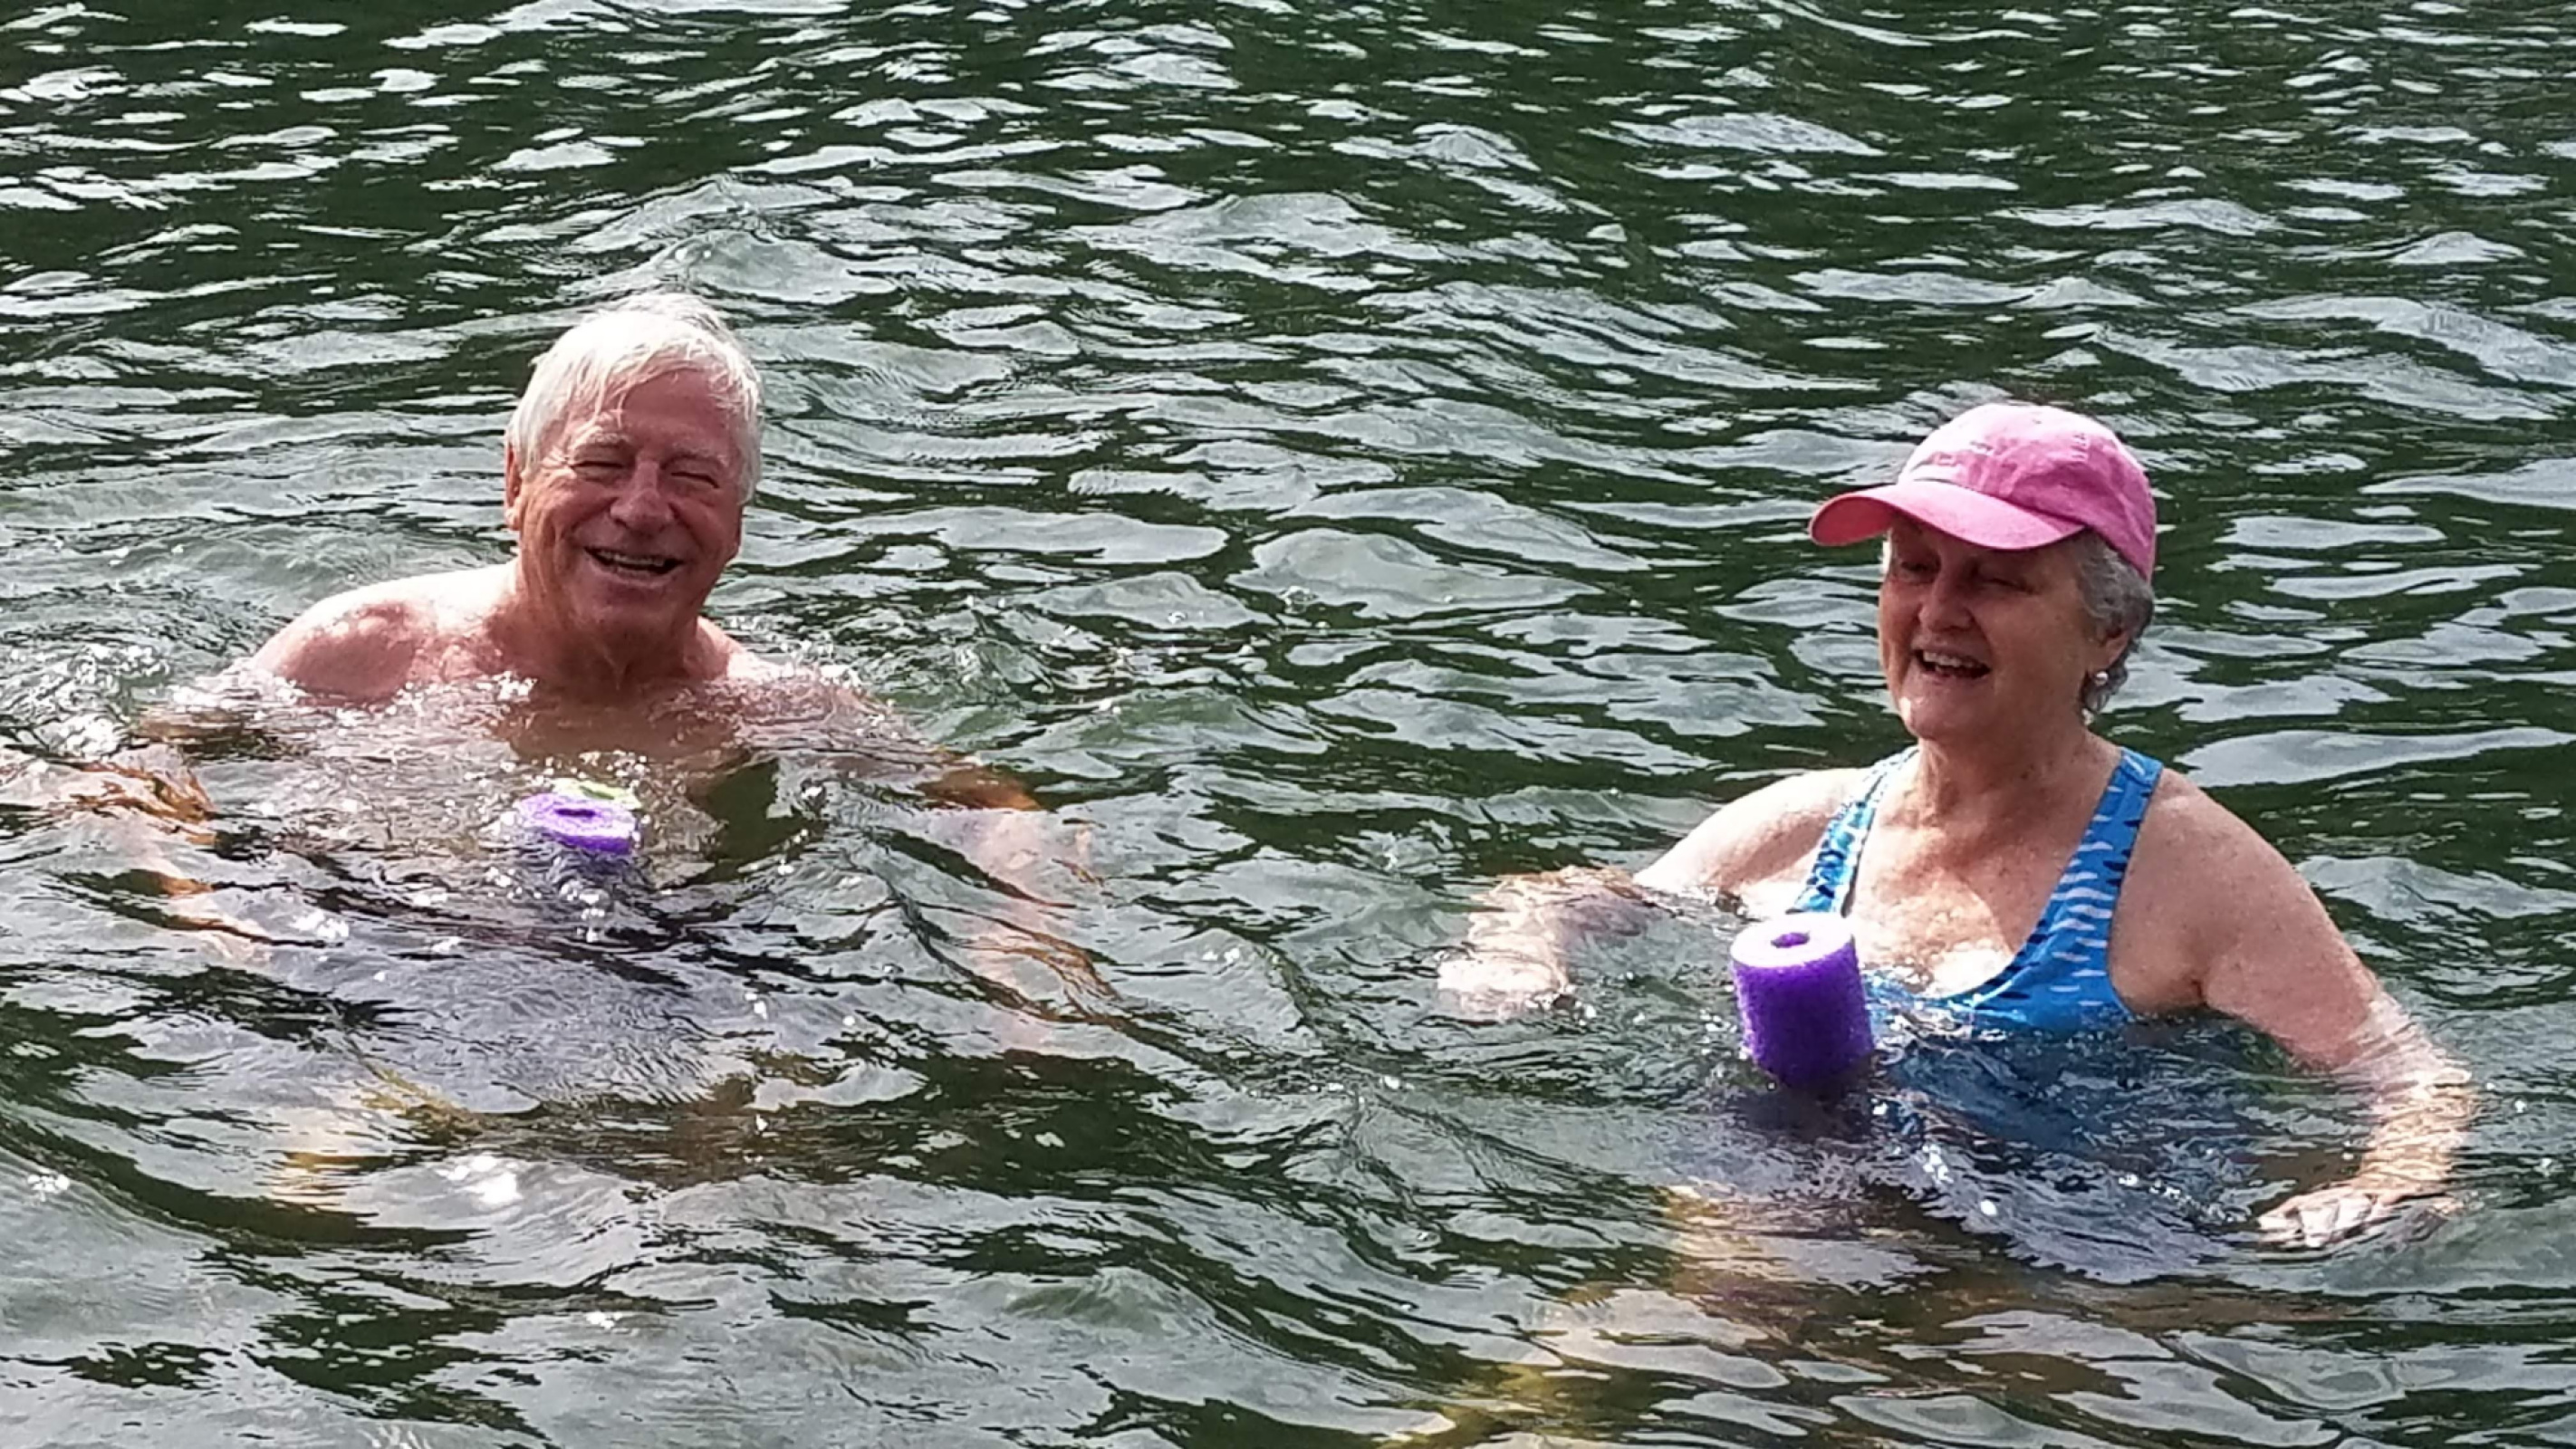 Poppop loved a lake vacation